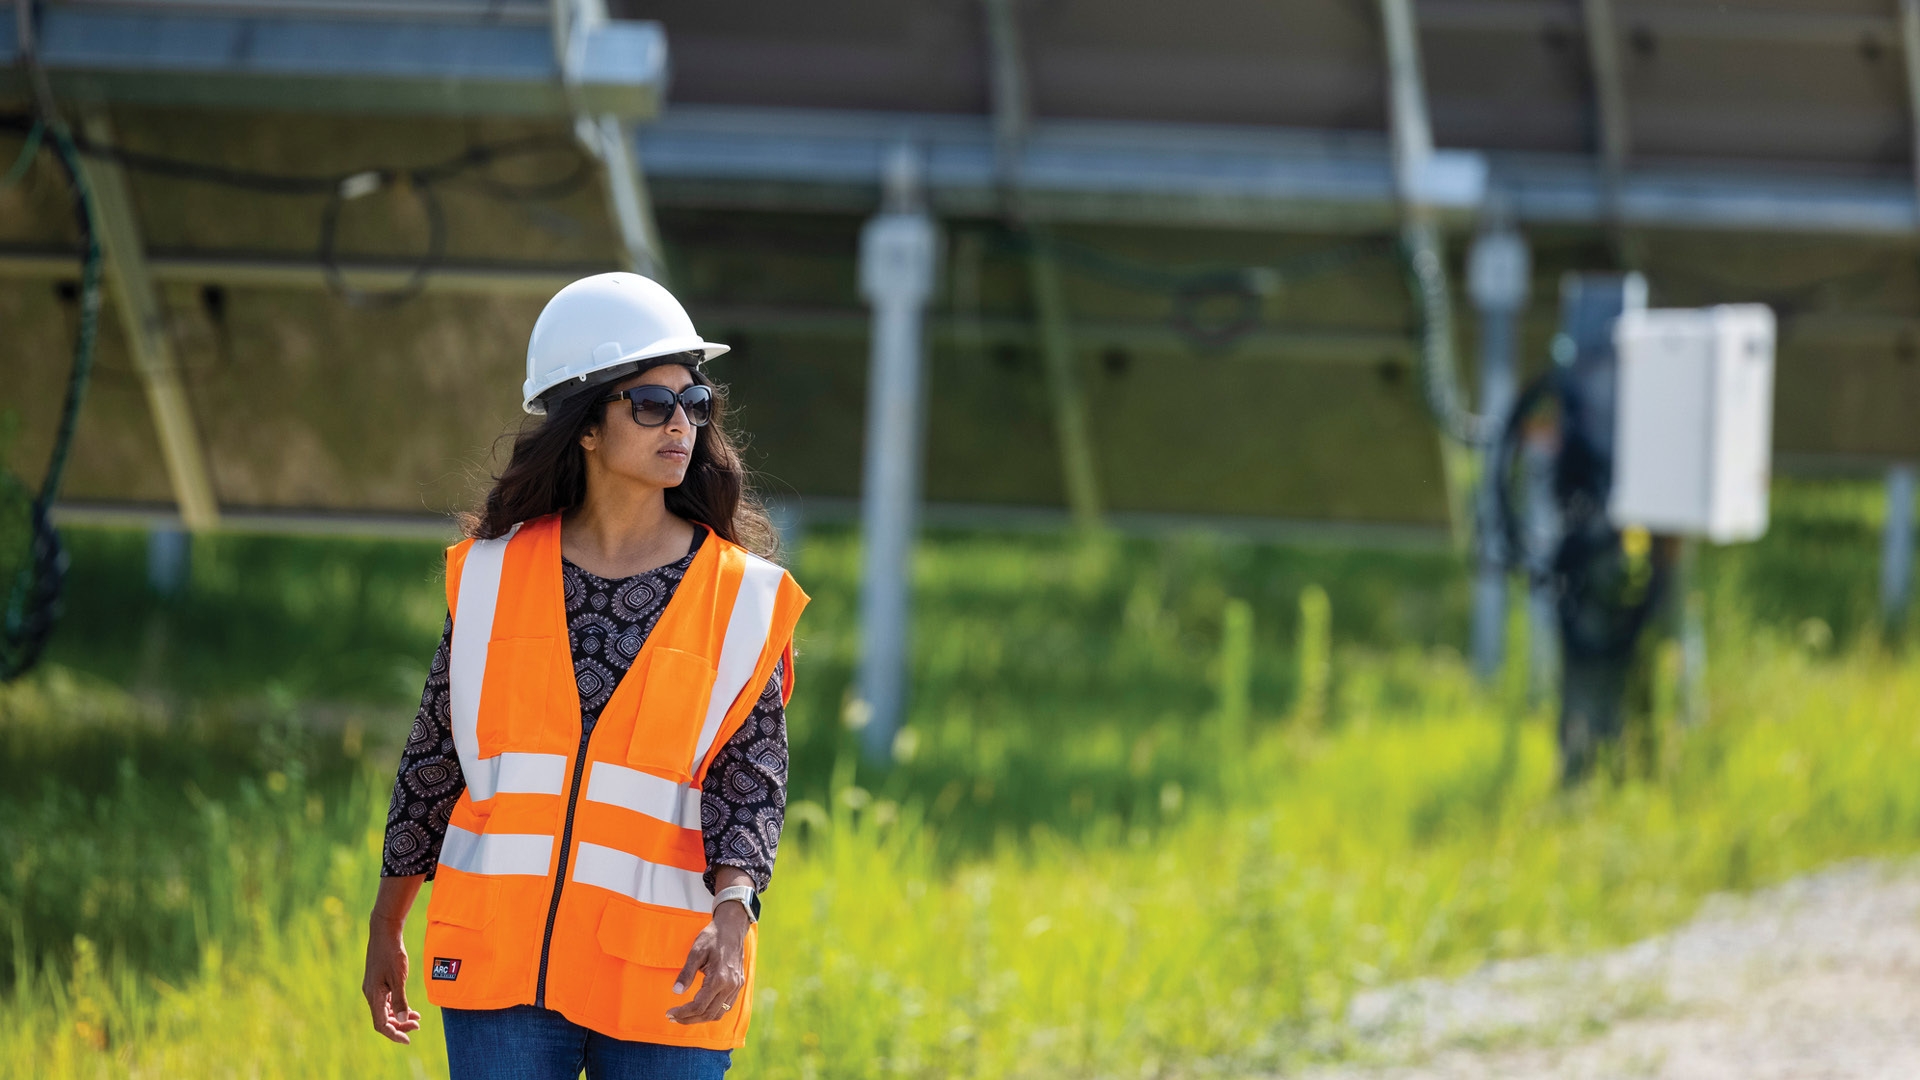 A woman wears an orange safey vest, a hard hat, and sungalsses as she walks outside by a solar farm.